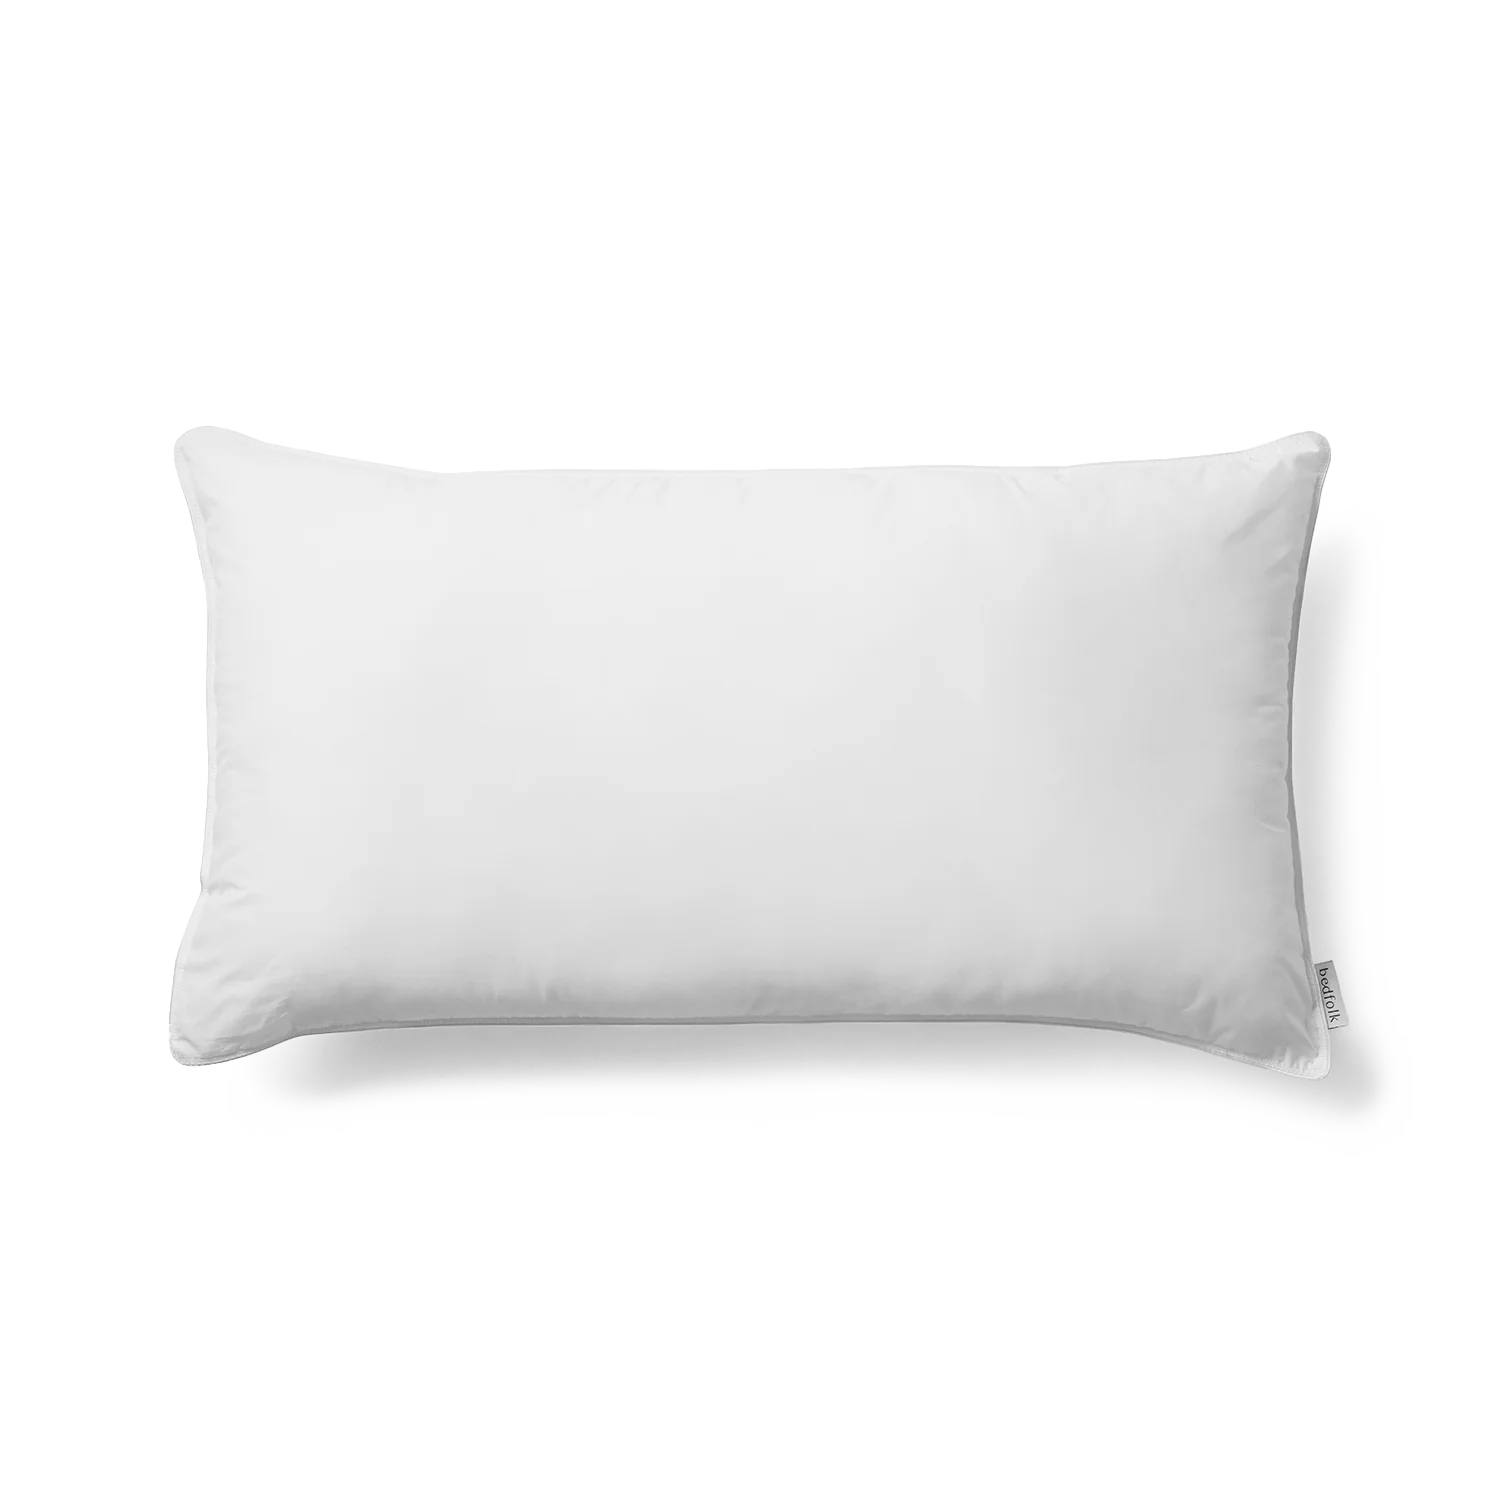 The Feather & Down Pillow